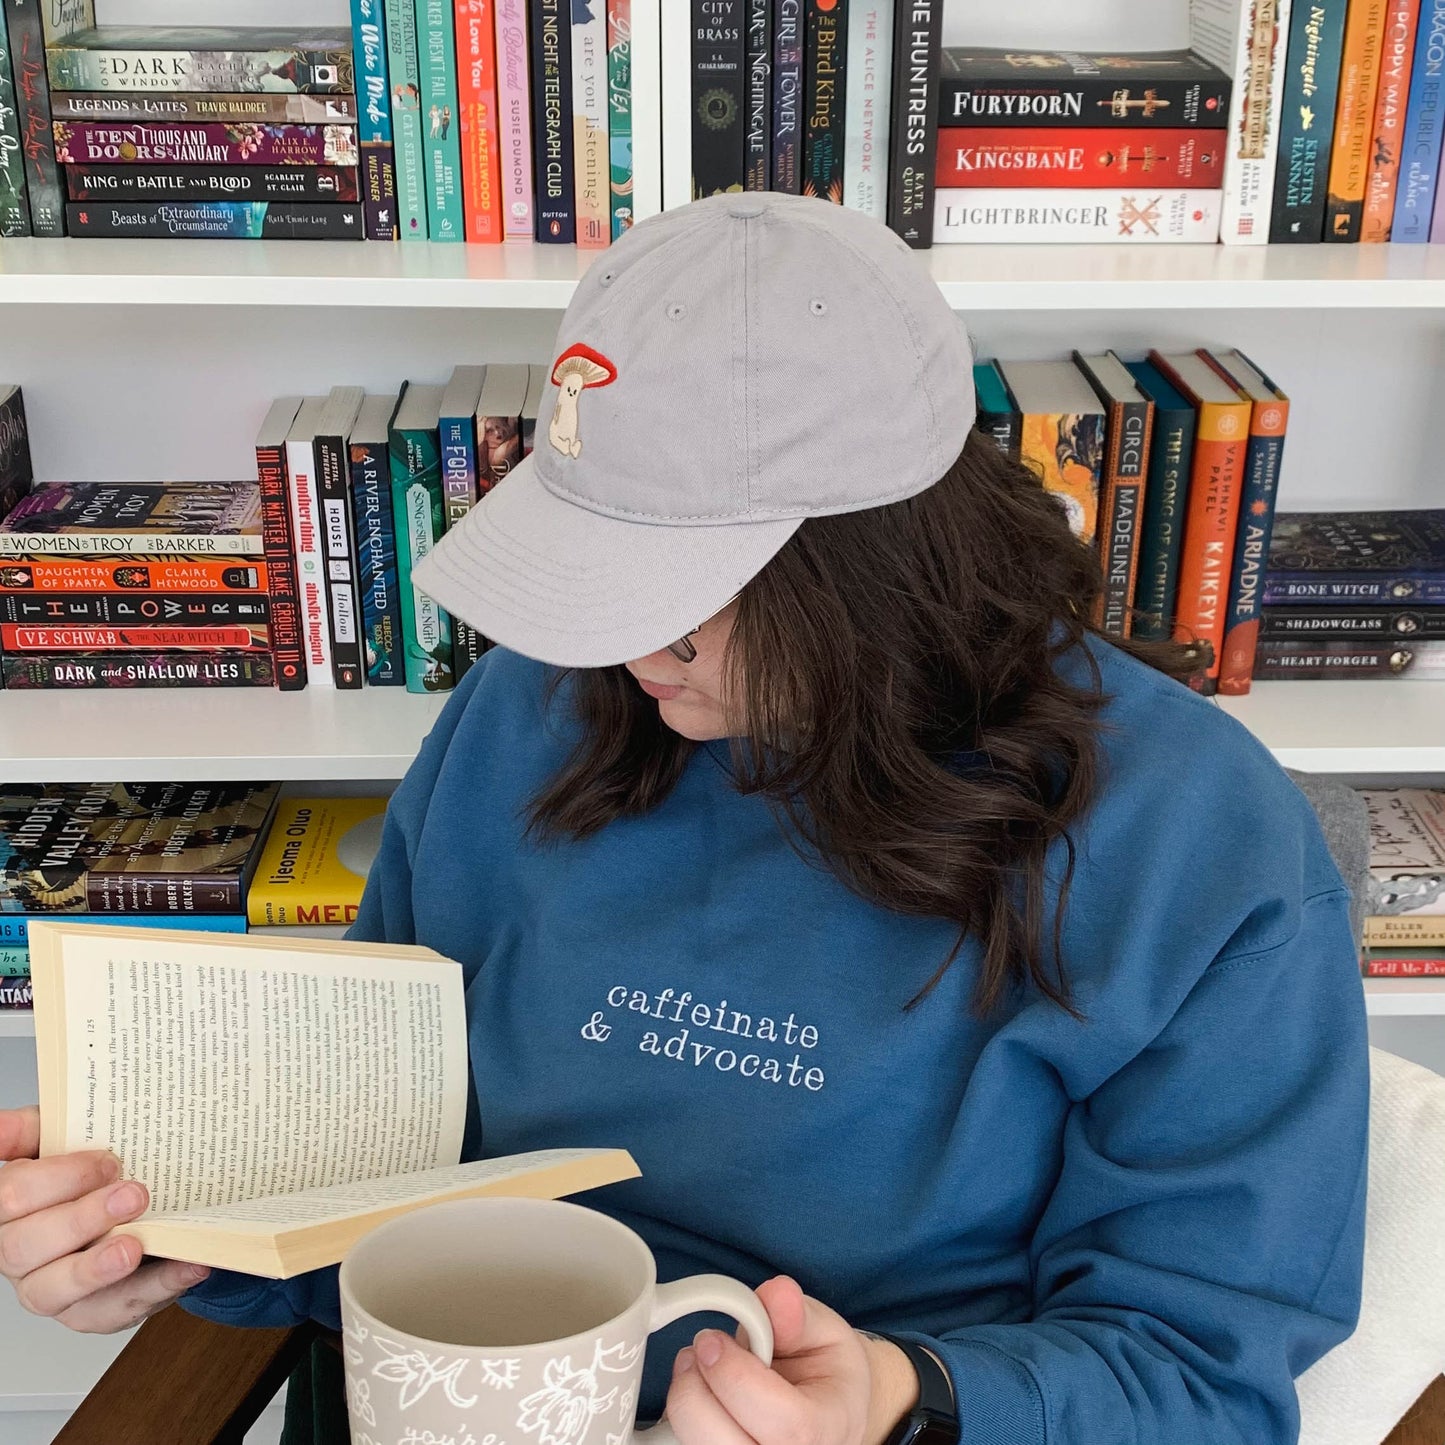 Ariel sitting in front of a bookcase reading and holding a coffee mug. She is wearing an indigo blue crew neck that is embroidered "caffeinate & advocate" on the front. Ariel is featured wearing a size Large.